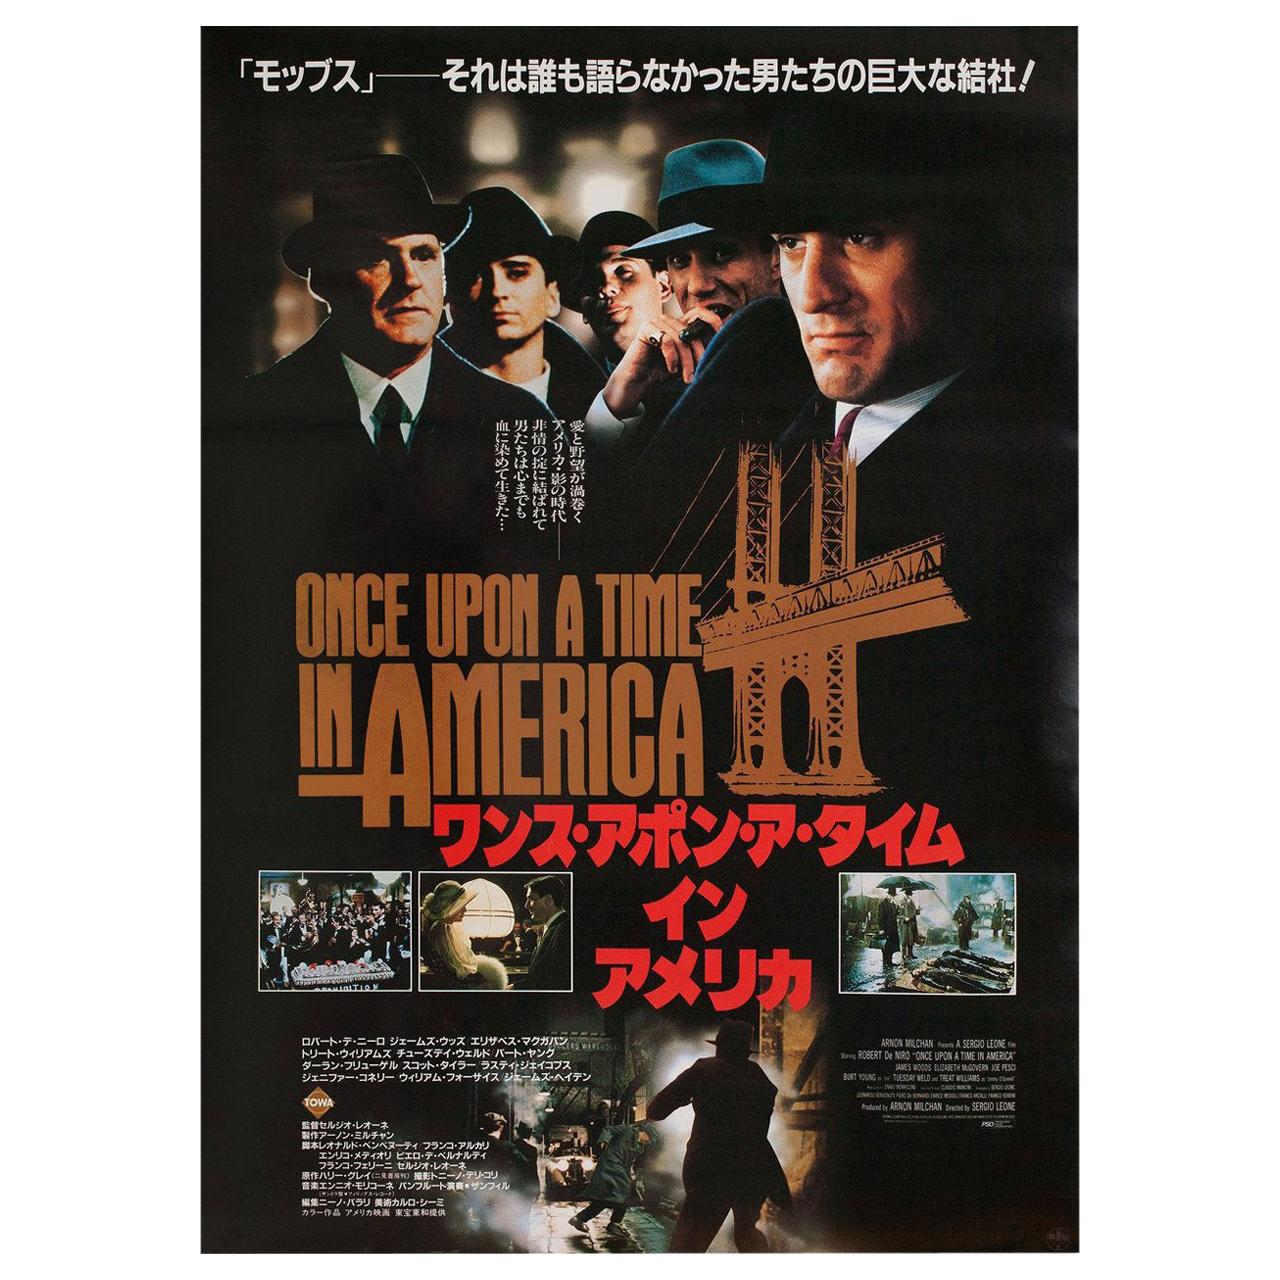 'Once Upon a Time in America' 1984 Japanese B2 Film Poster